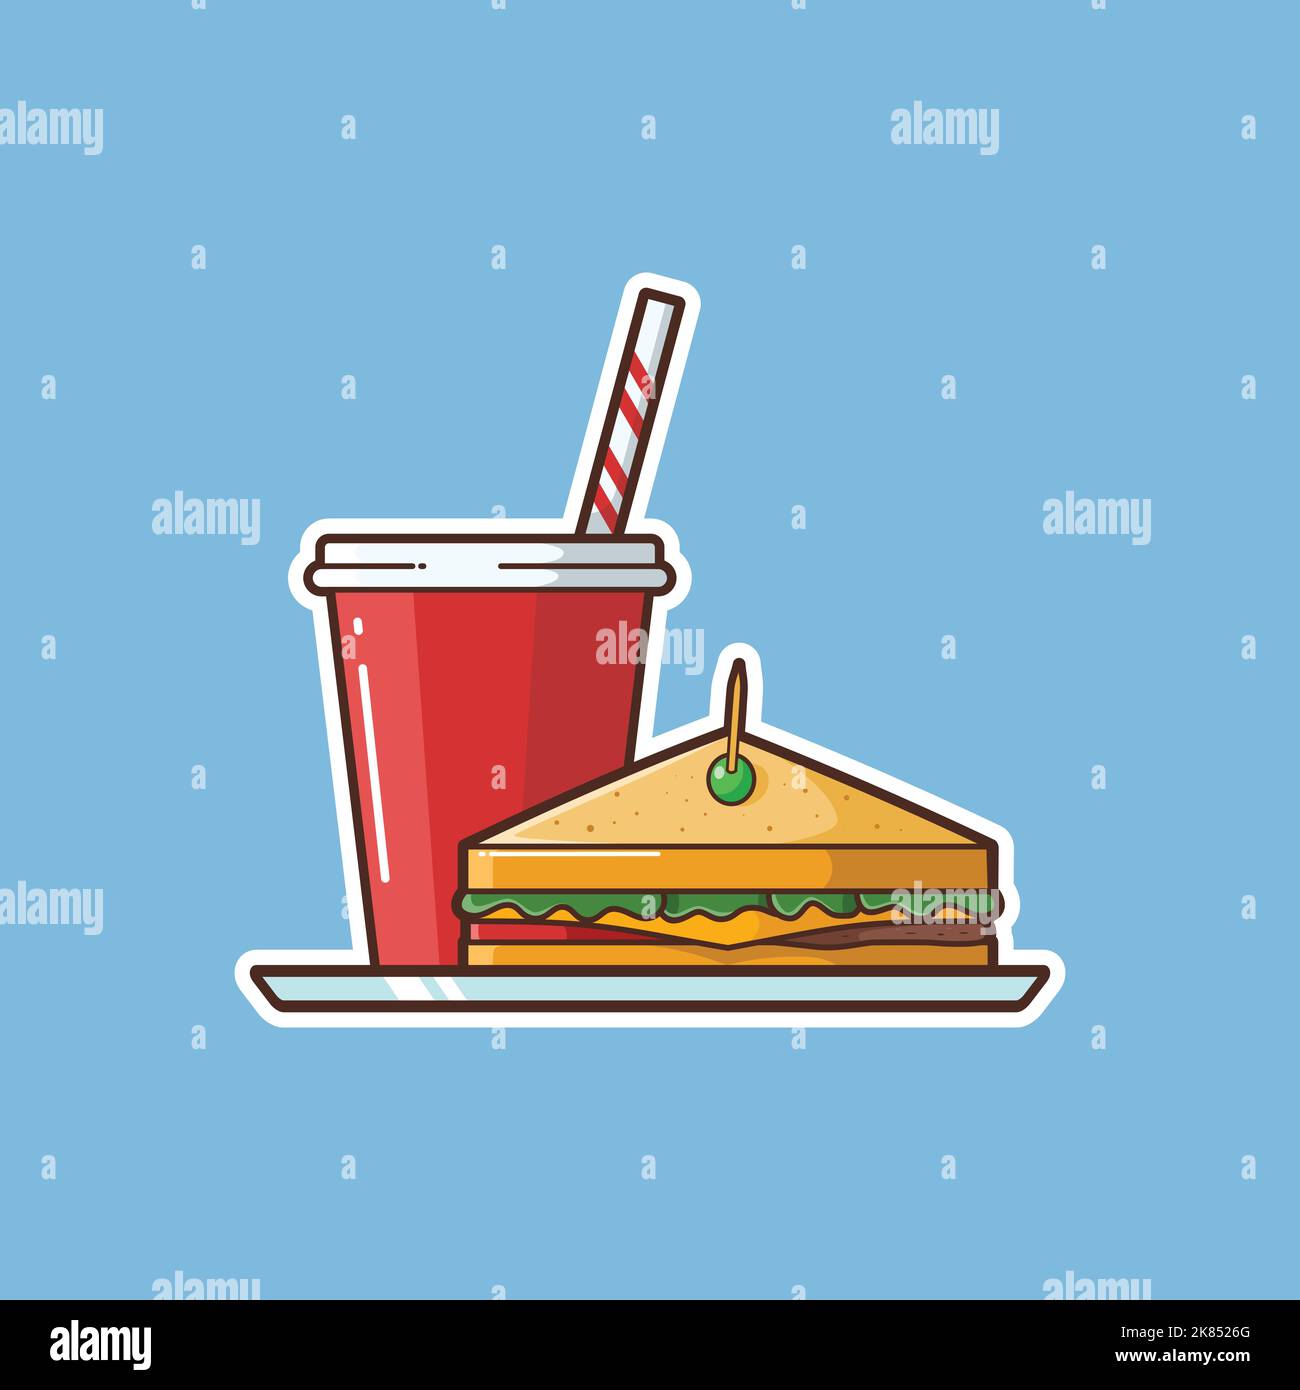 Illustration of Sandwich and Soft Drink - vector illustration design - Food Logo - Food Illustration - Fast food Illustration Stock Vector